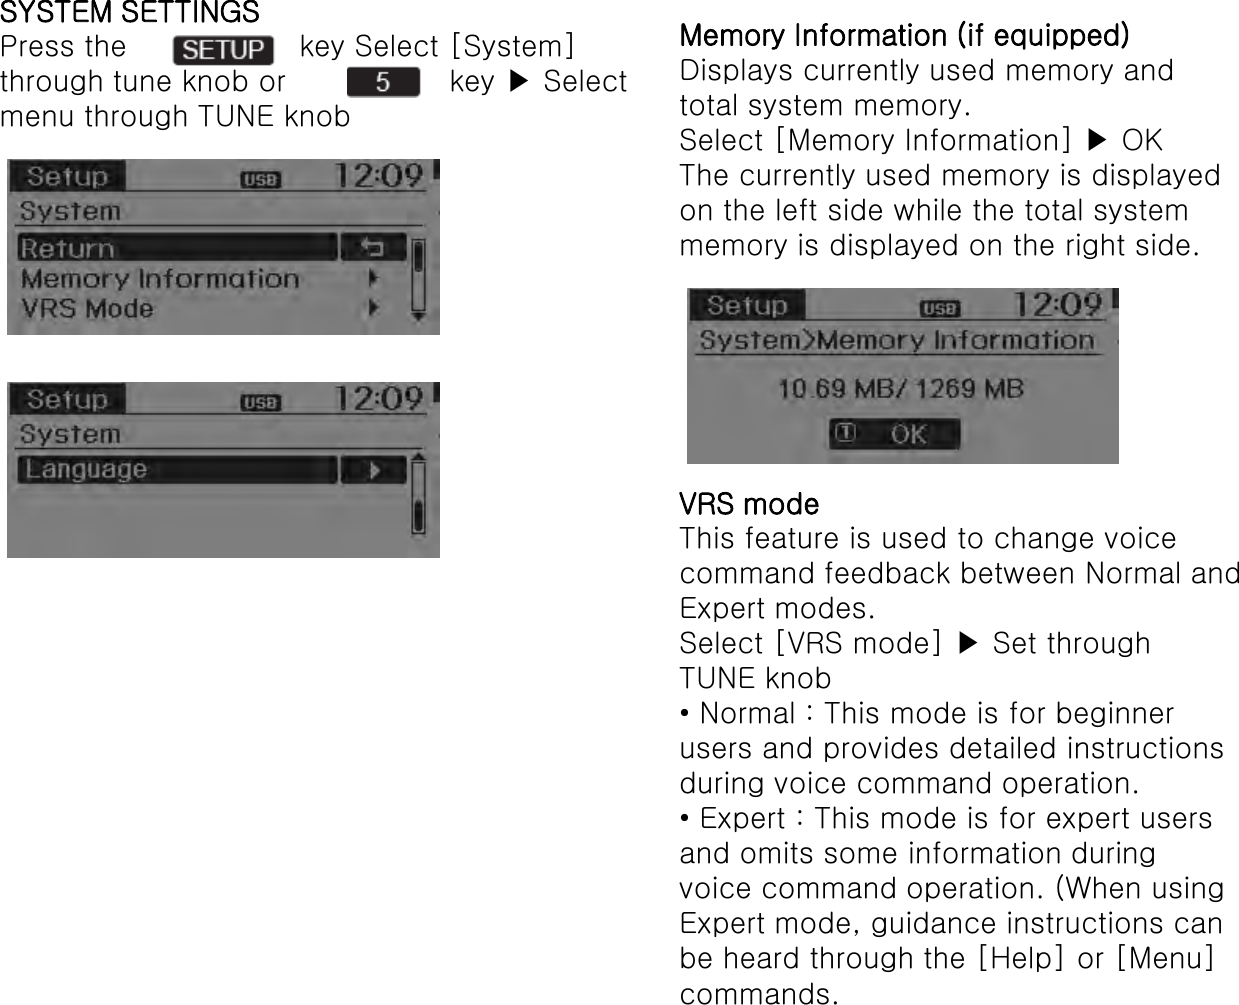 SYSTEM SETTINGSPress the  key Select [System]through tune knob or  key ▶Selectmenu through TUNE knobMemory Information (if equipped)Displays currently used memory andtotal system memory.Select [Memory Information] ▶ OKThe currently used memory is displayedon the left side while the total systemmemory is displayed on the right side.VRS modeThis feature is used to change voicecommand feedback between Normal andExpert modes.Select [VRS mode] ▶Set throughTUNE knob• Normal : This mode is for beginnerusers and provides detailed instructionsduring voice command operation.• Expert : This mode is for expert usersand omits some information duringvoice command operation. (When usingExpert mode, guidance instructions canbe heard through the [Help] or [Menu]commands.